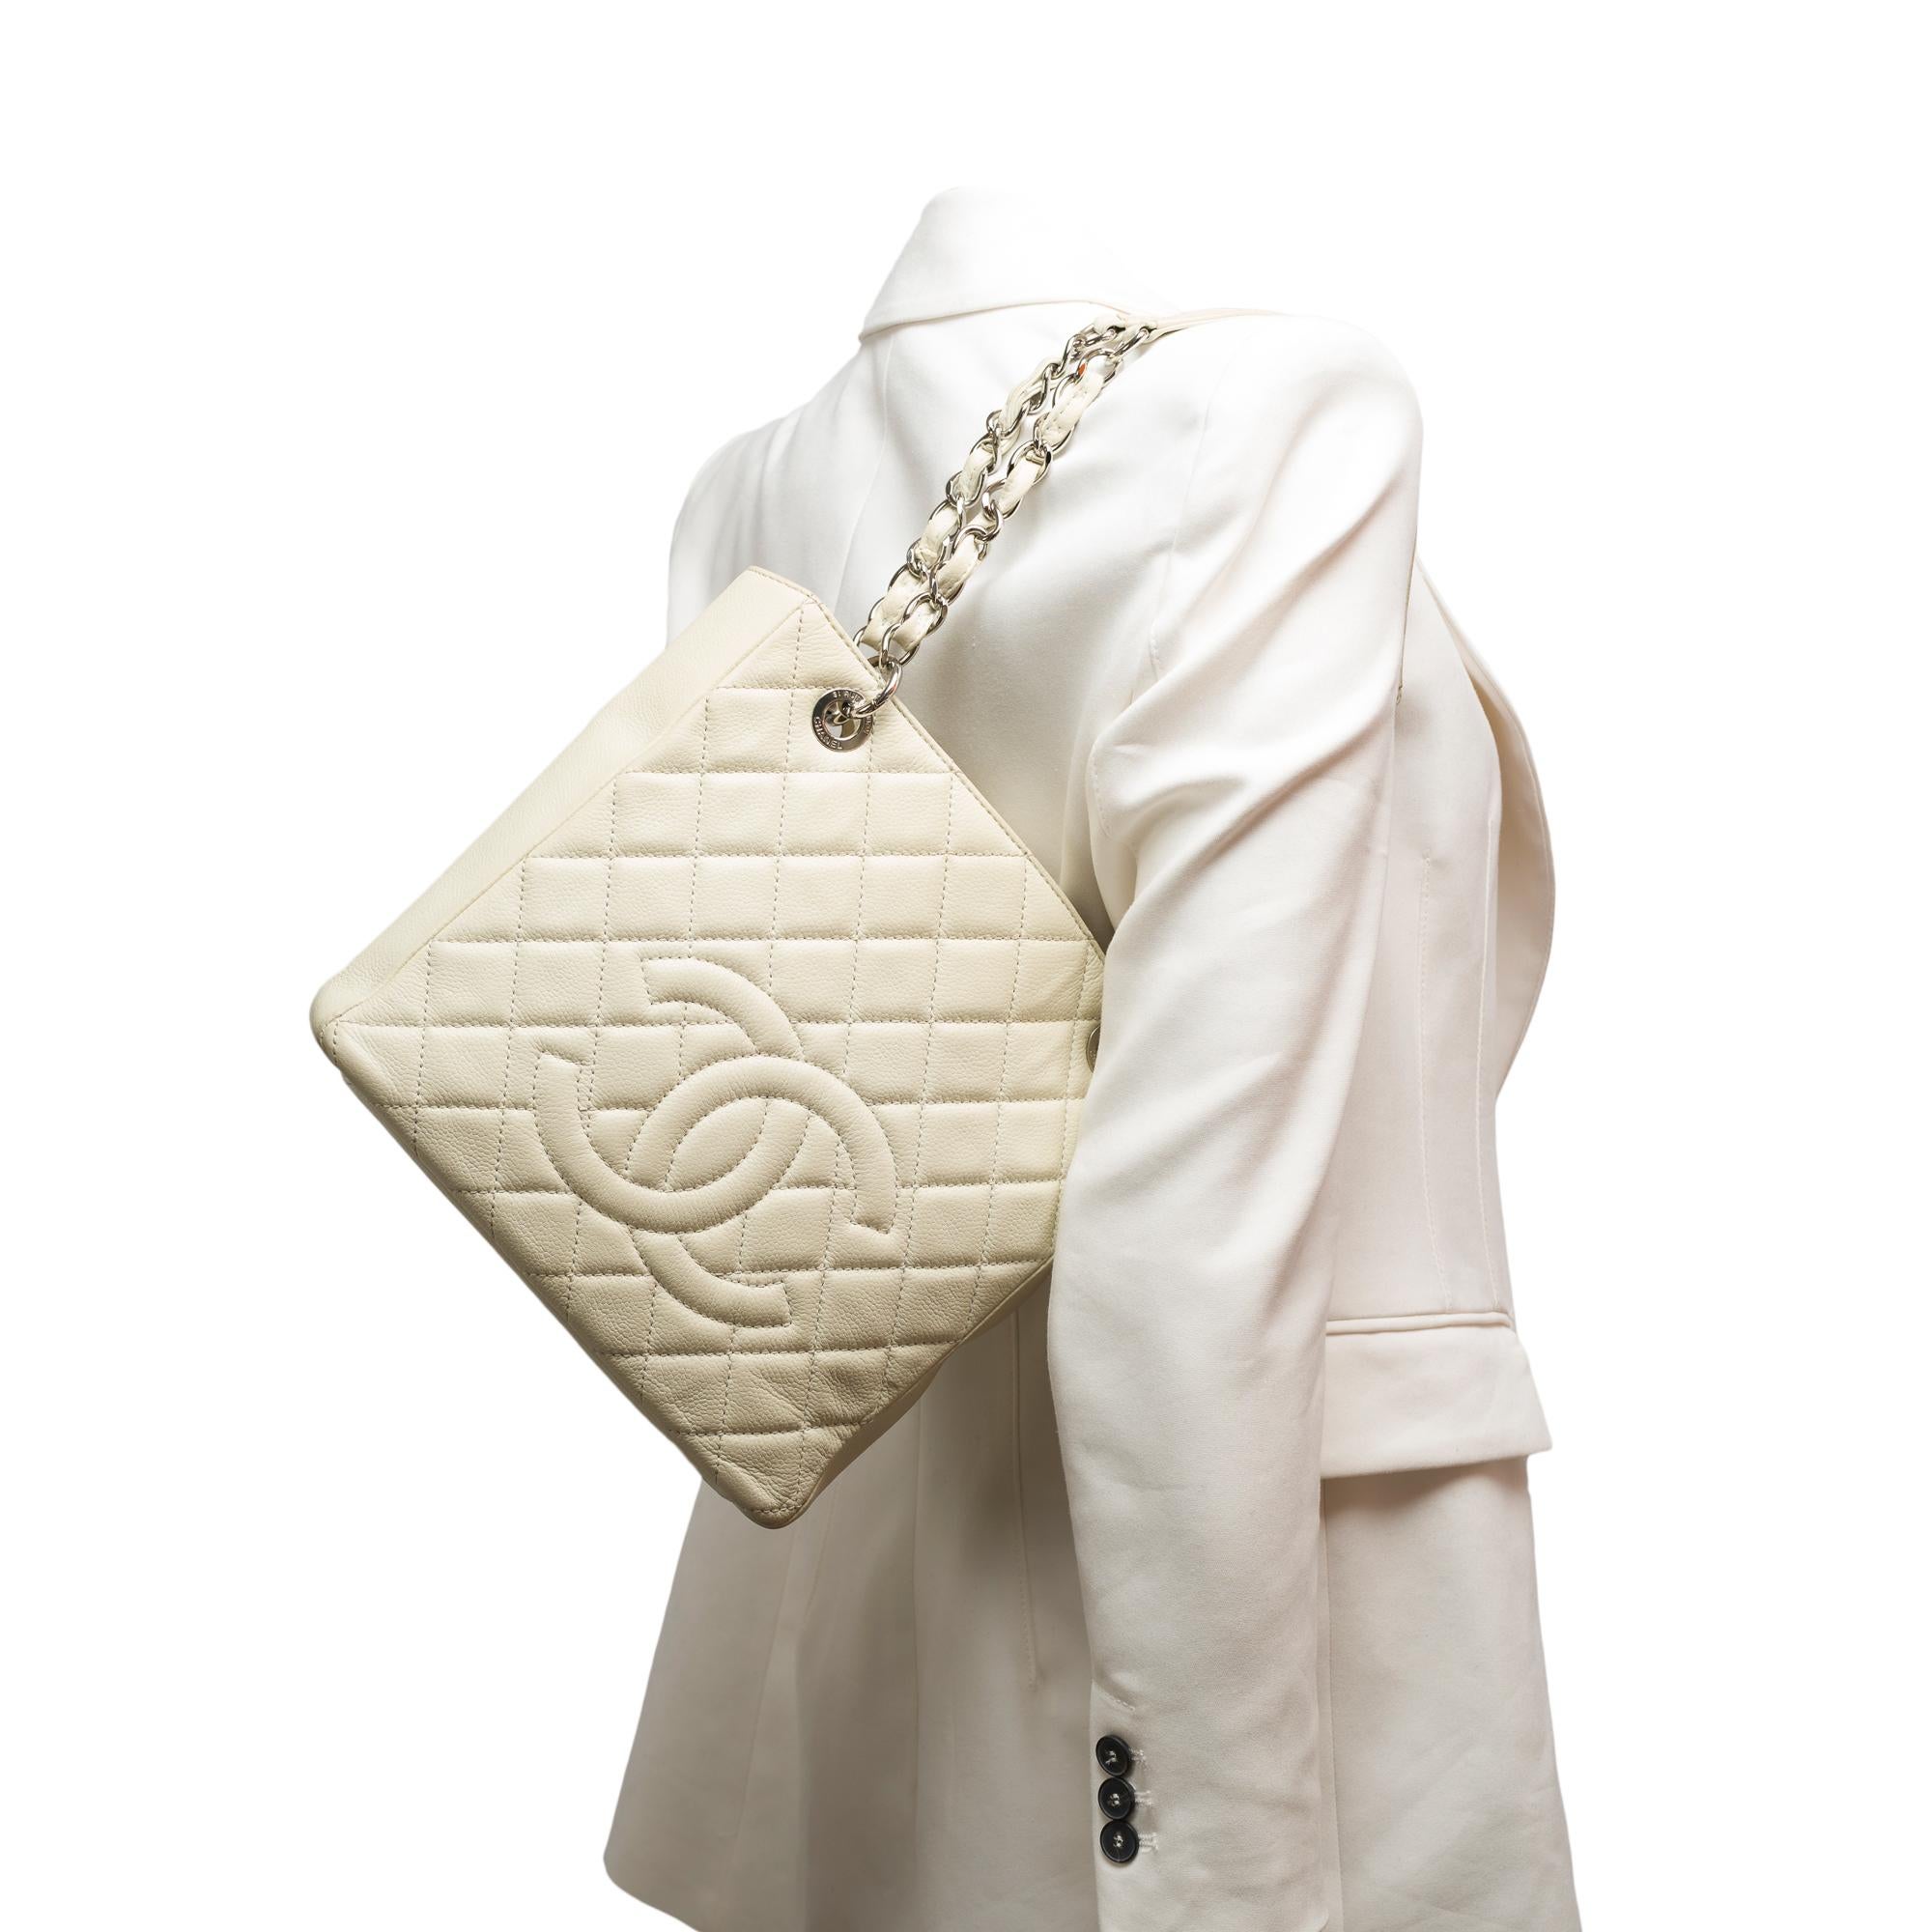  Chanel Petit Shopping Tote bag (PST) in Off-White Caviar quilted leather, SHW For Sale 9